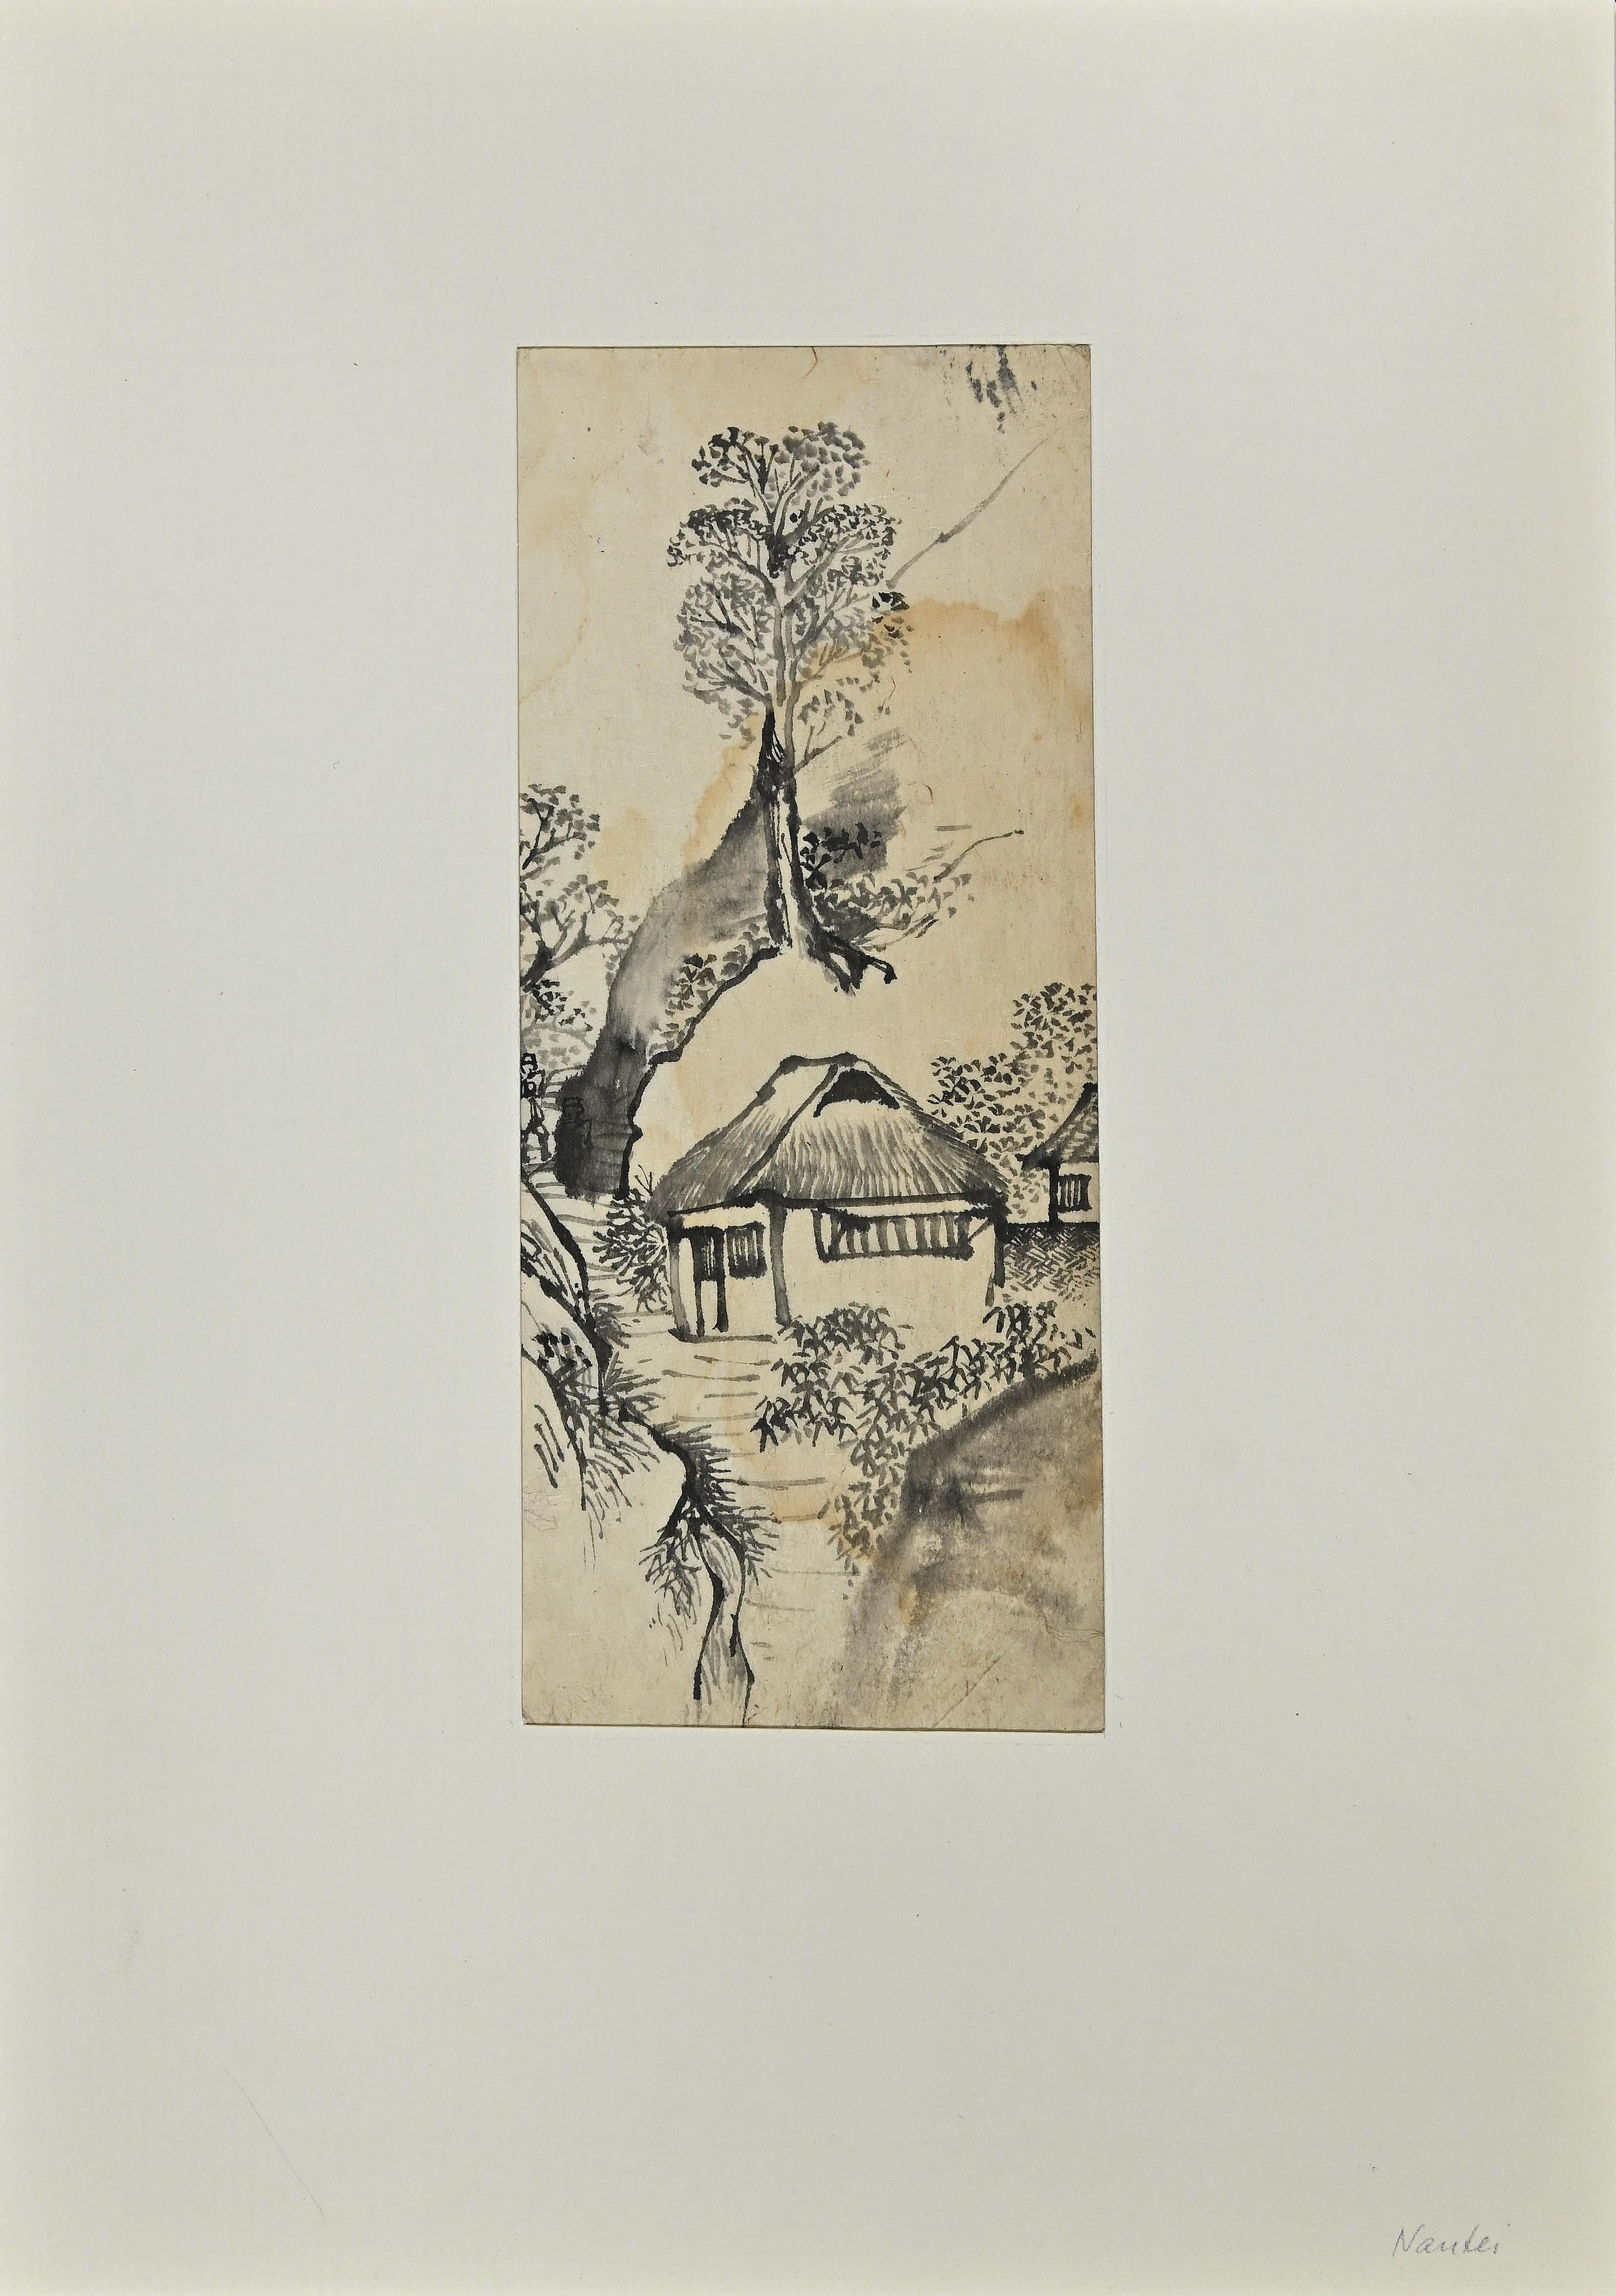 Village is a Black Ink Drawing attributed to Nishimura Nantei in the Early 19th Century.

Good conditions.

The artwork is depicted through soft strokes in a well-balanced composition.